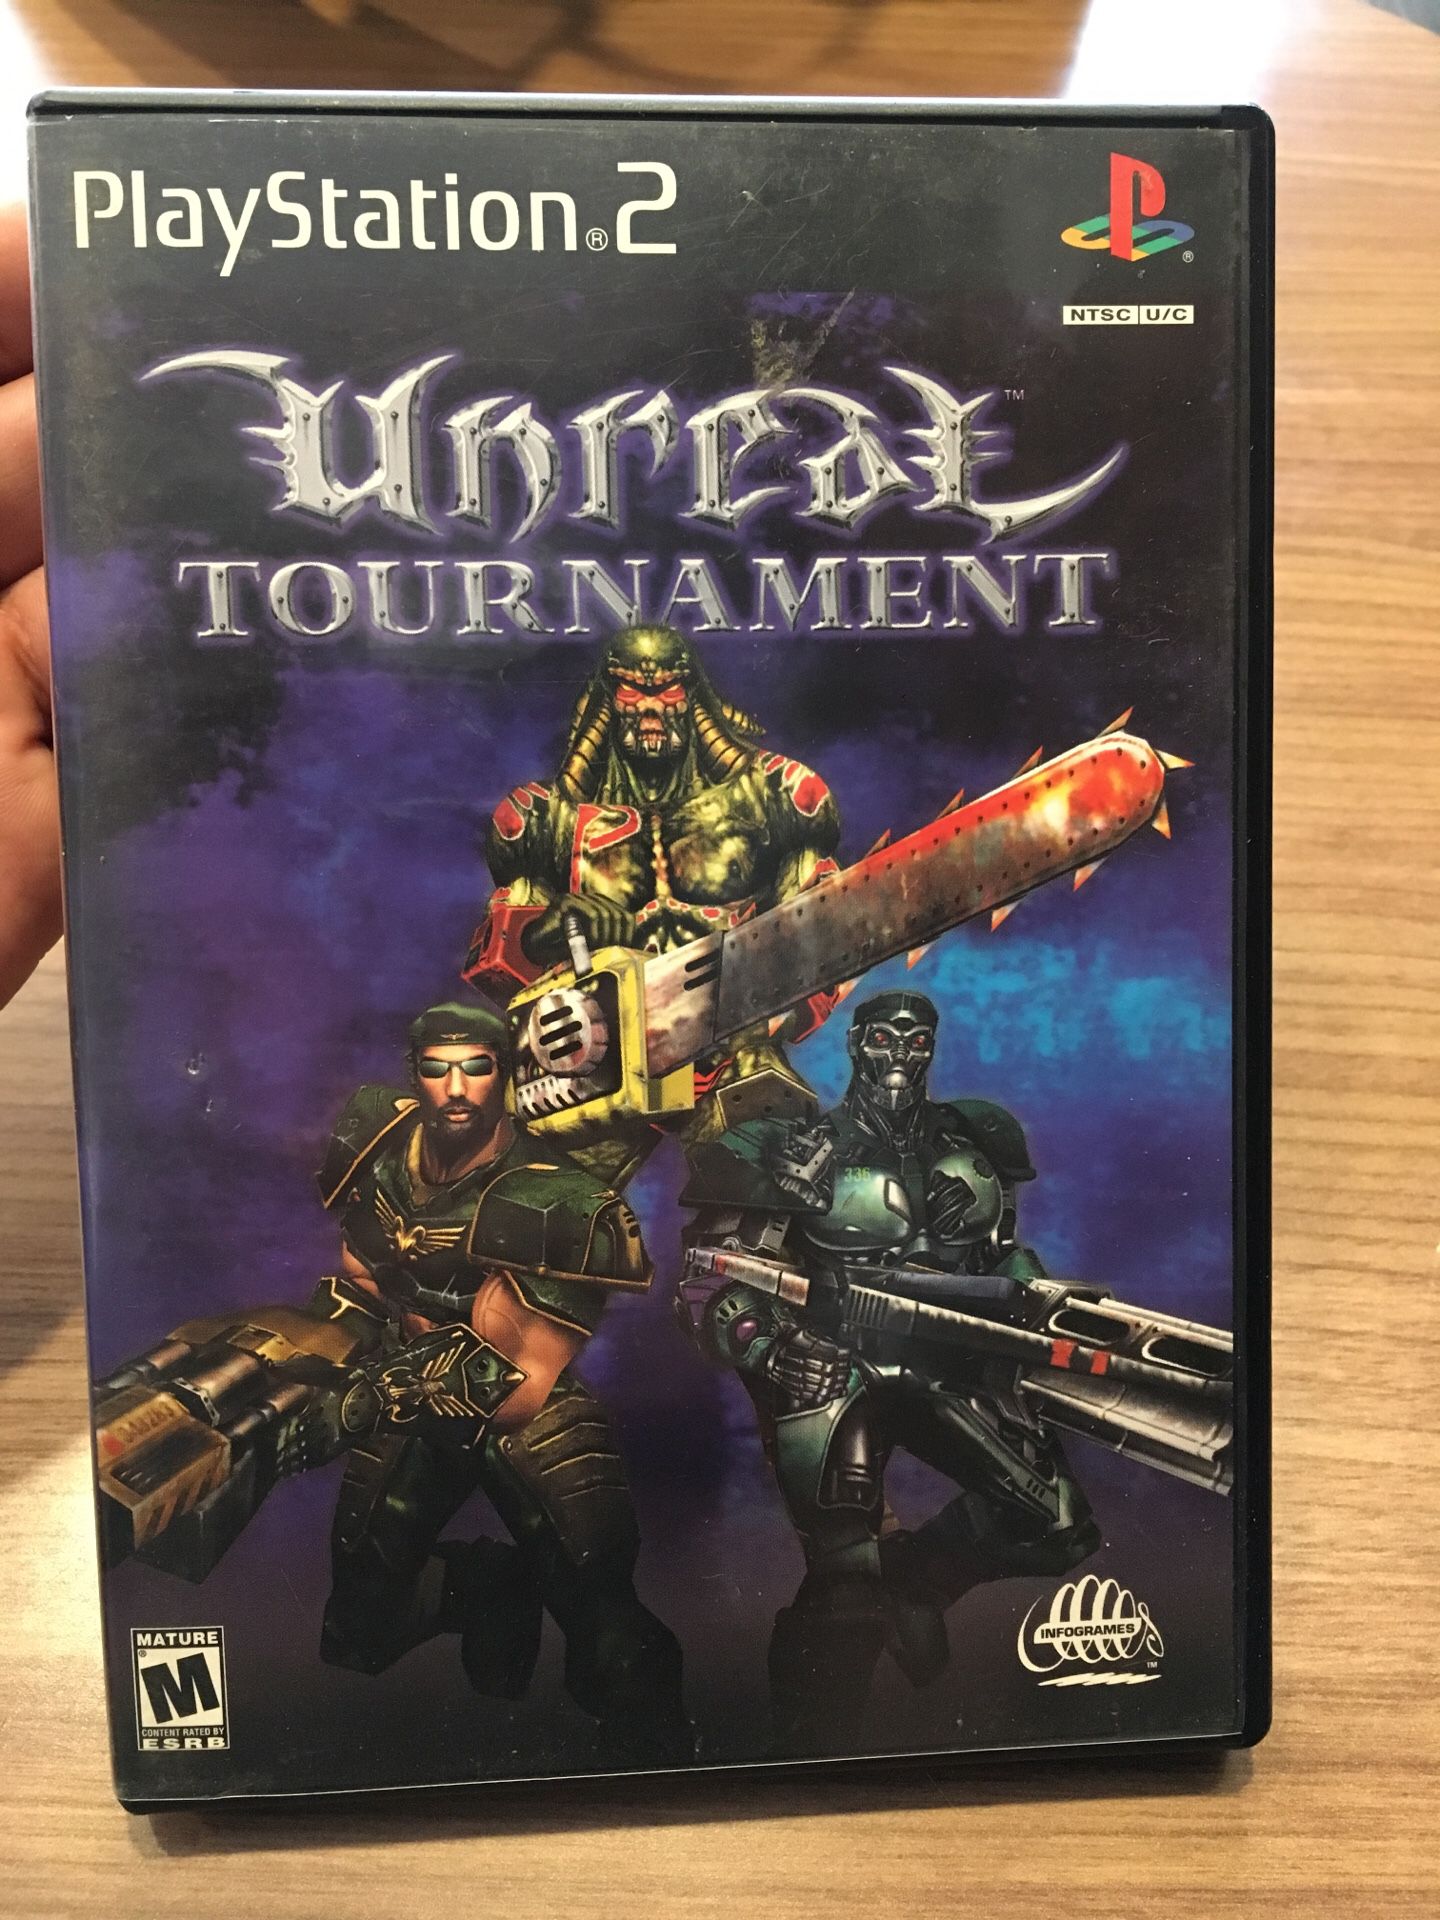 Unreal Tournament for the Ps2